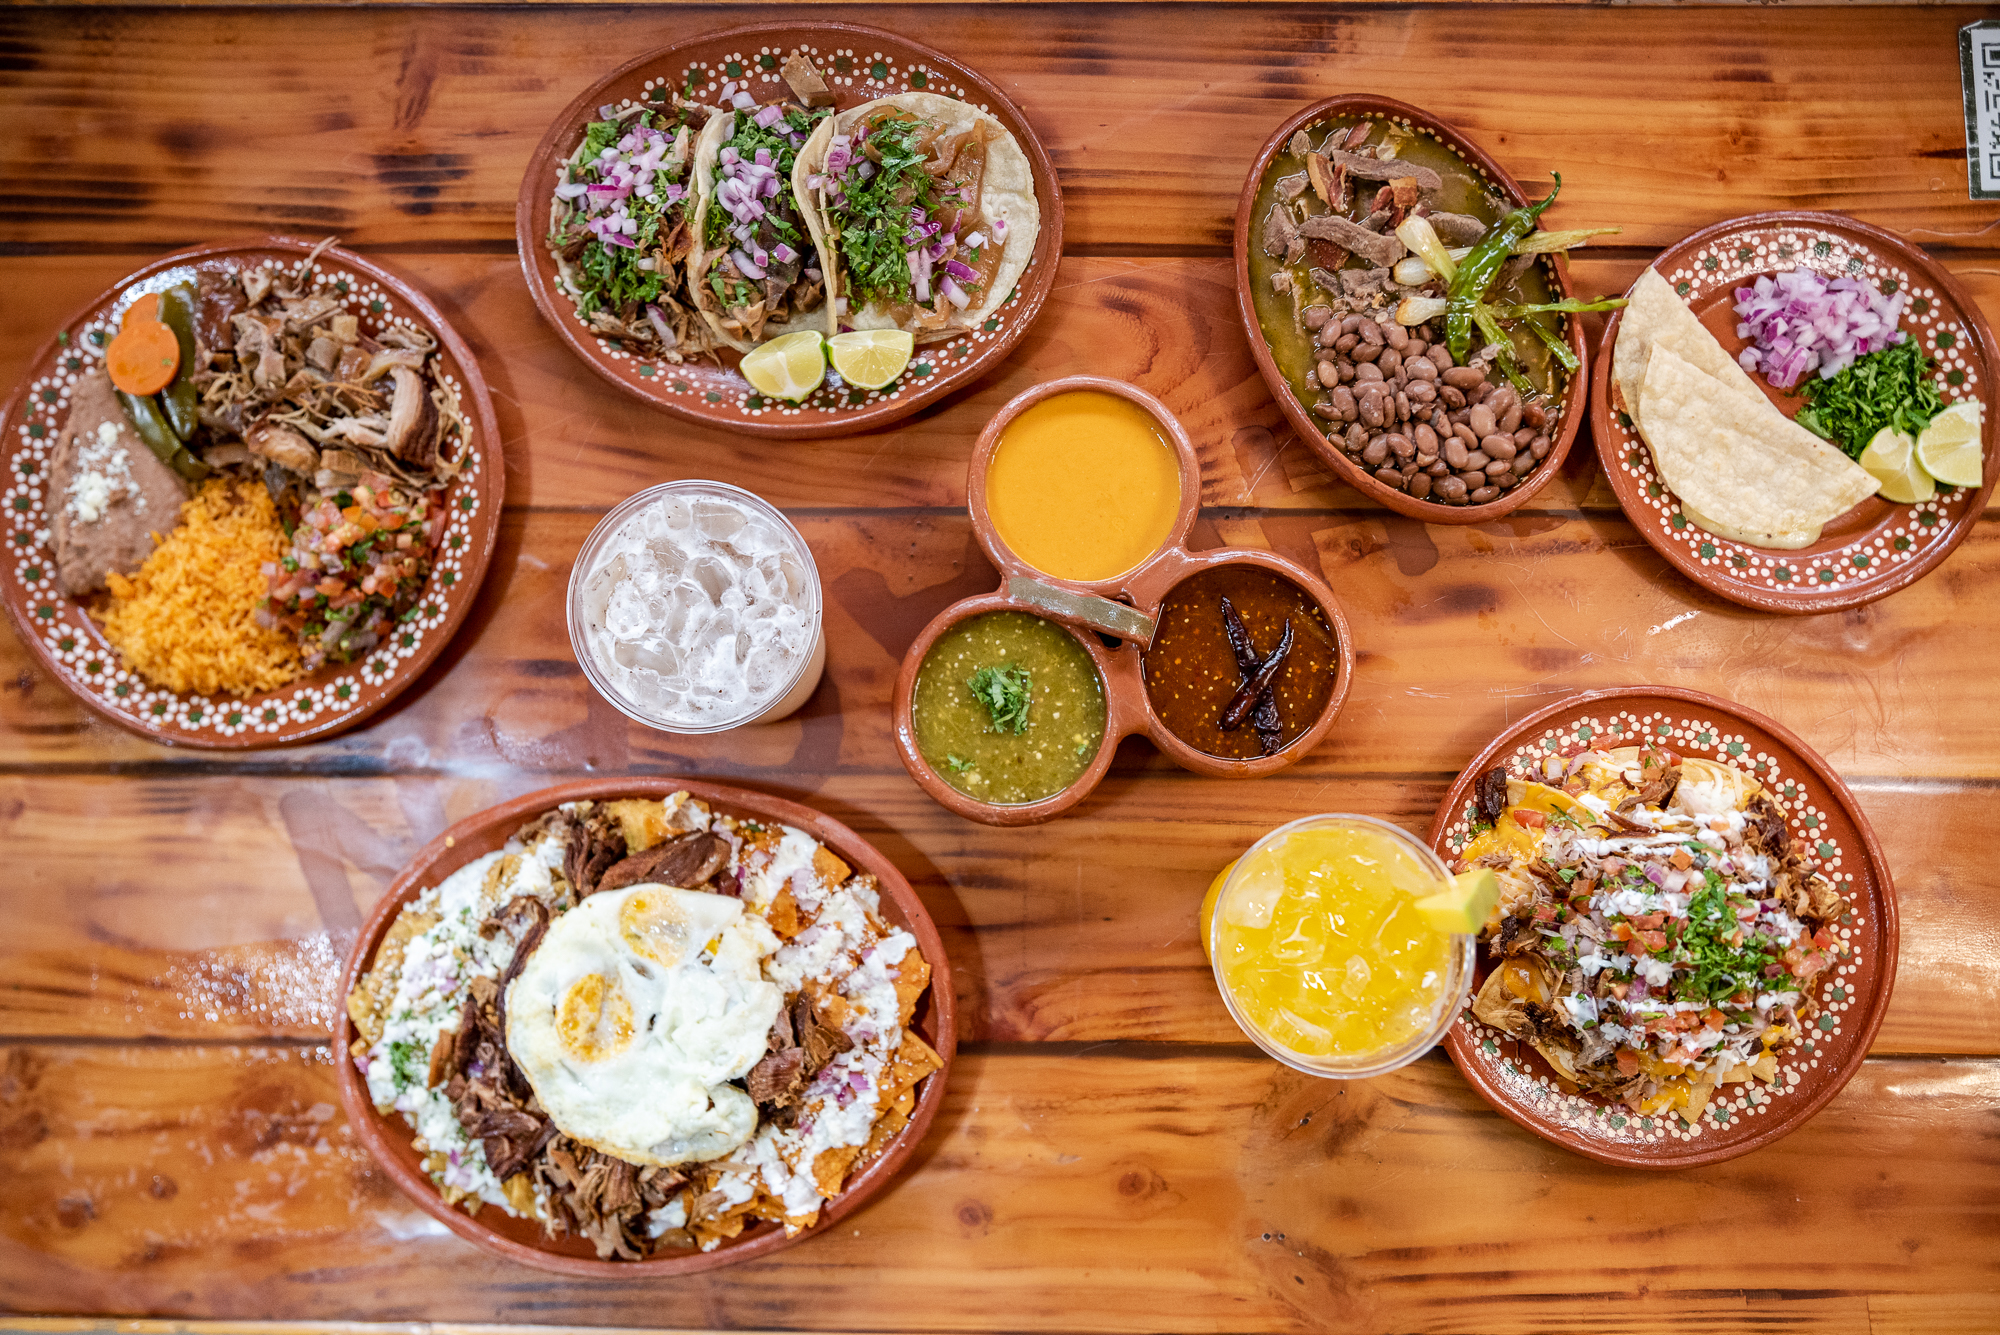 Carnitas-topped tacos, chilaquiles, nachos, and more from Carnitas El Artista.